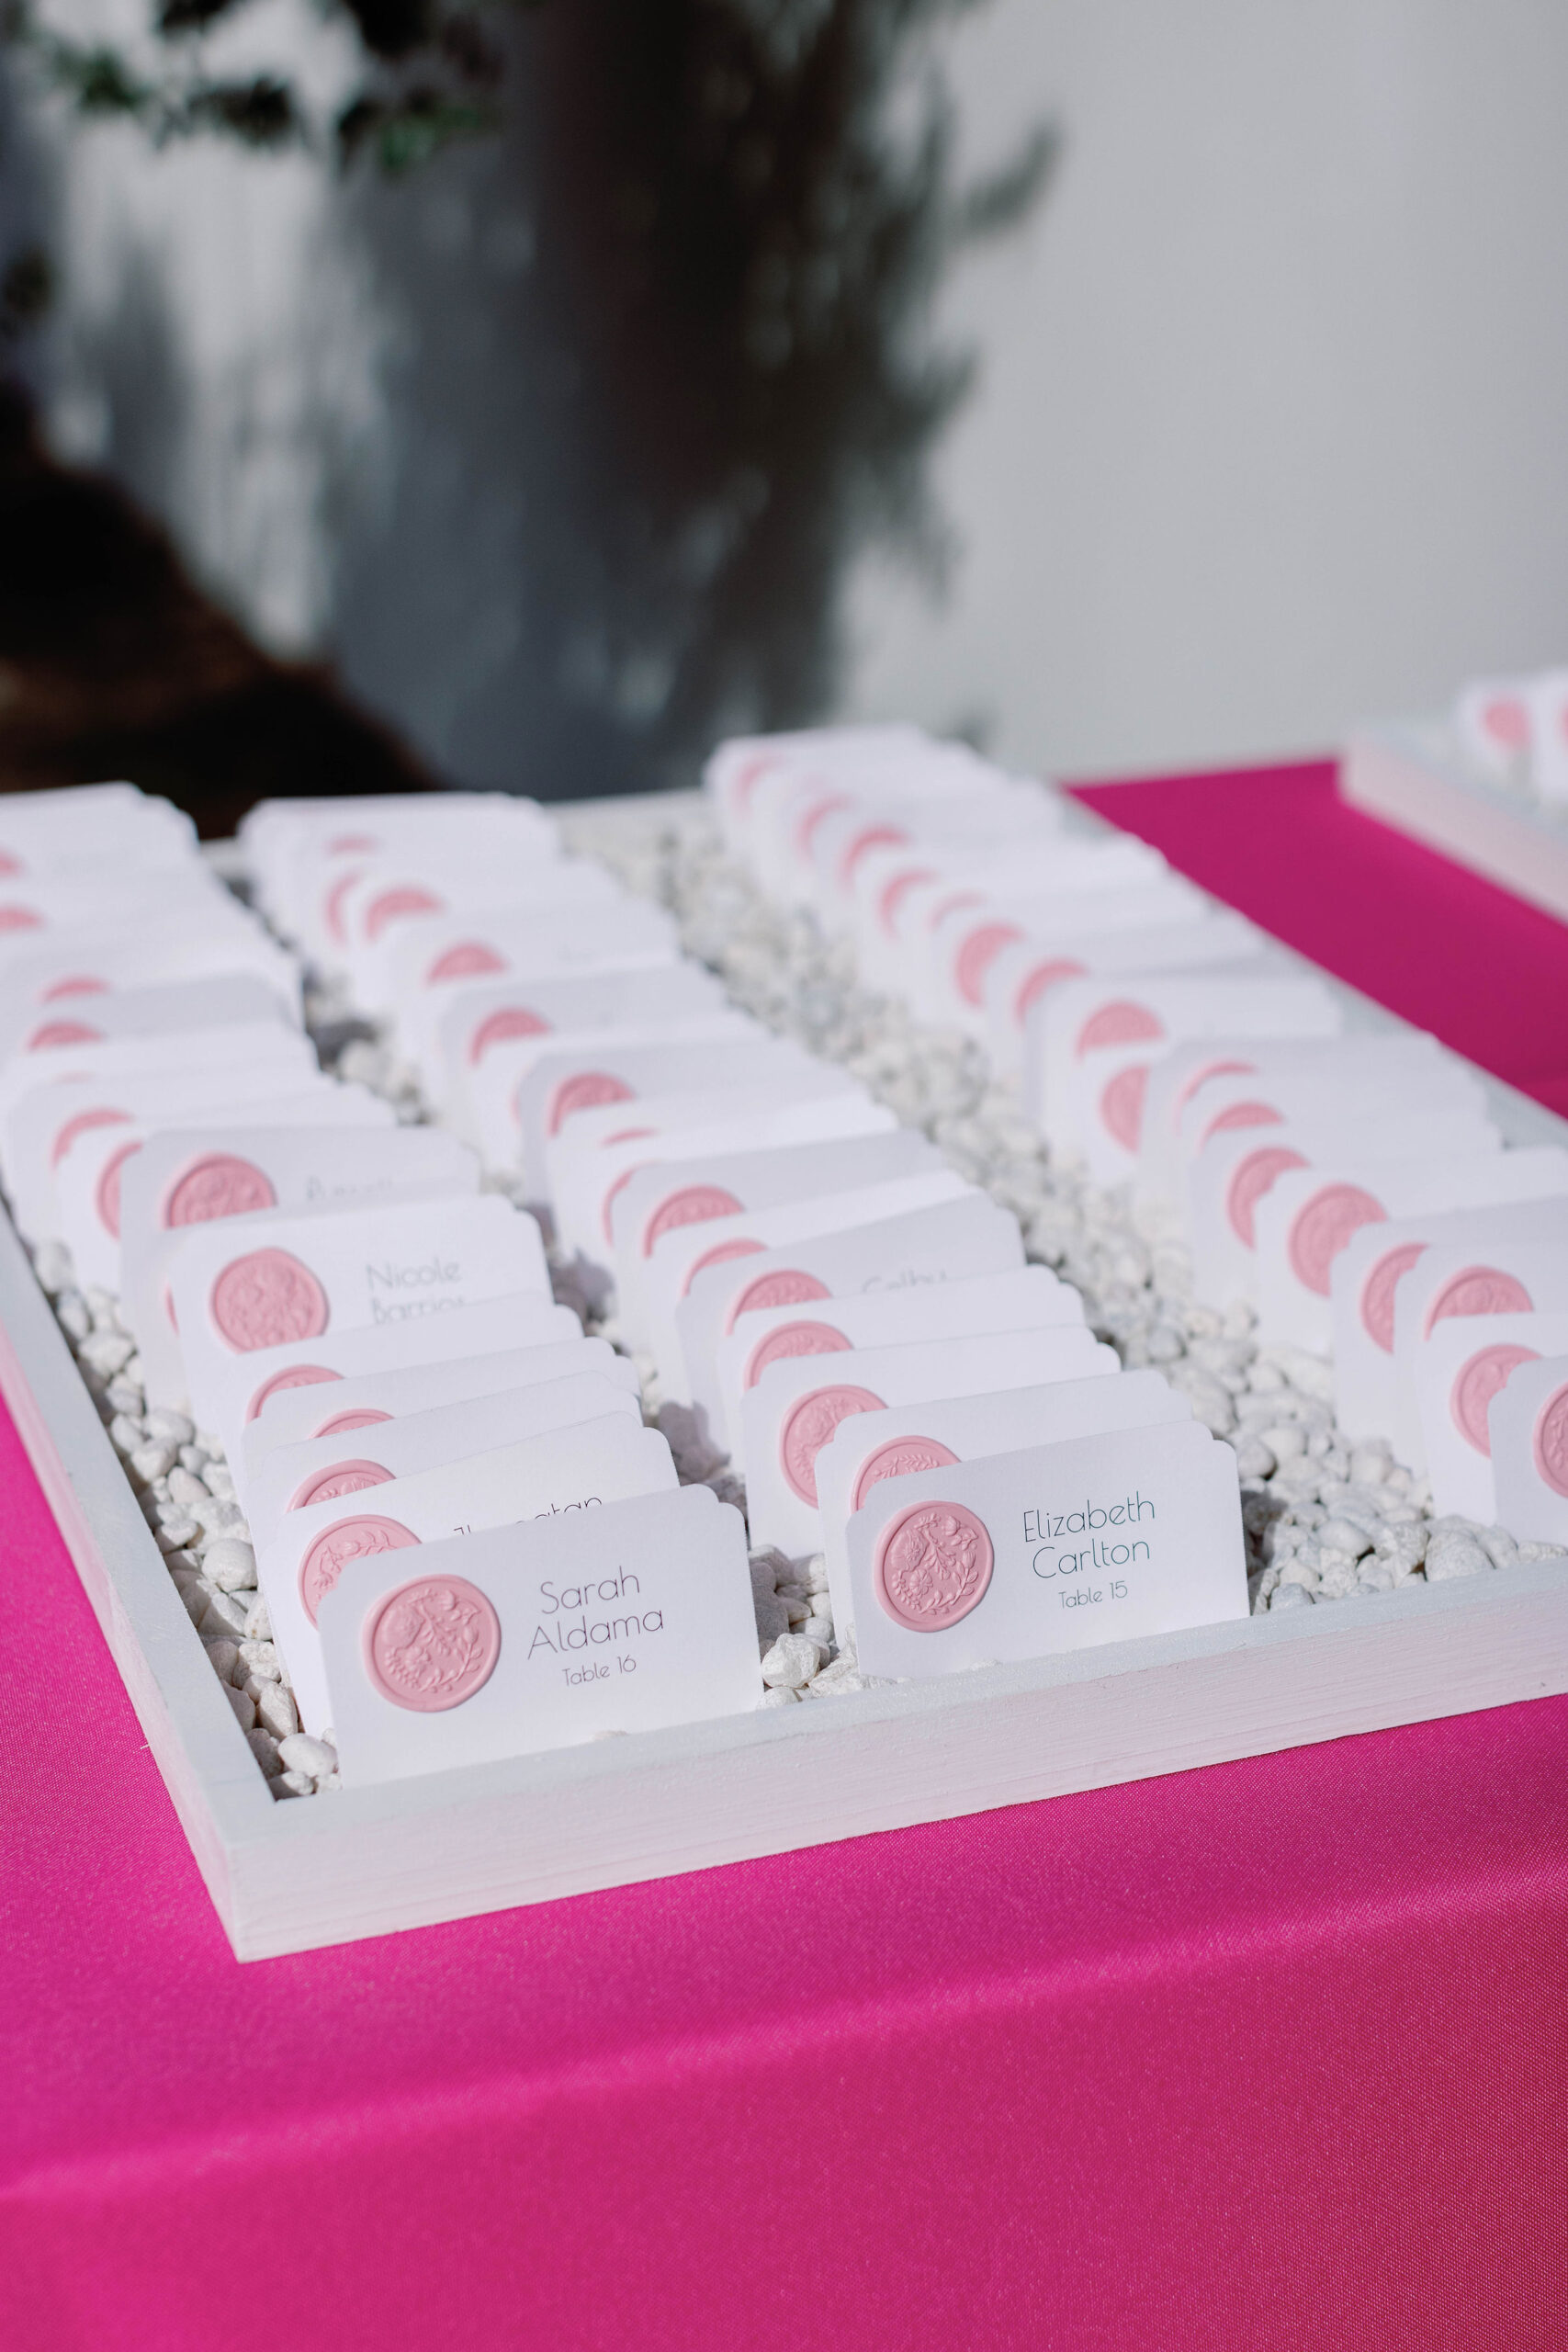 Pink and White Escort Card table at Grand lady wedding in Austin Texas. | Photo by Sarah Block Photography